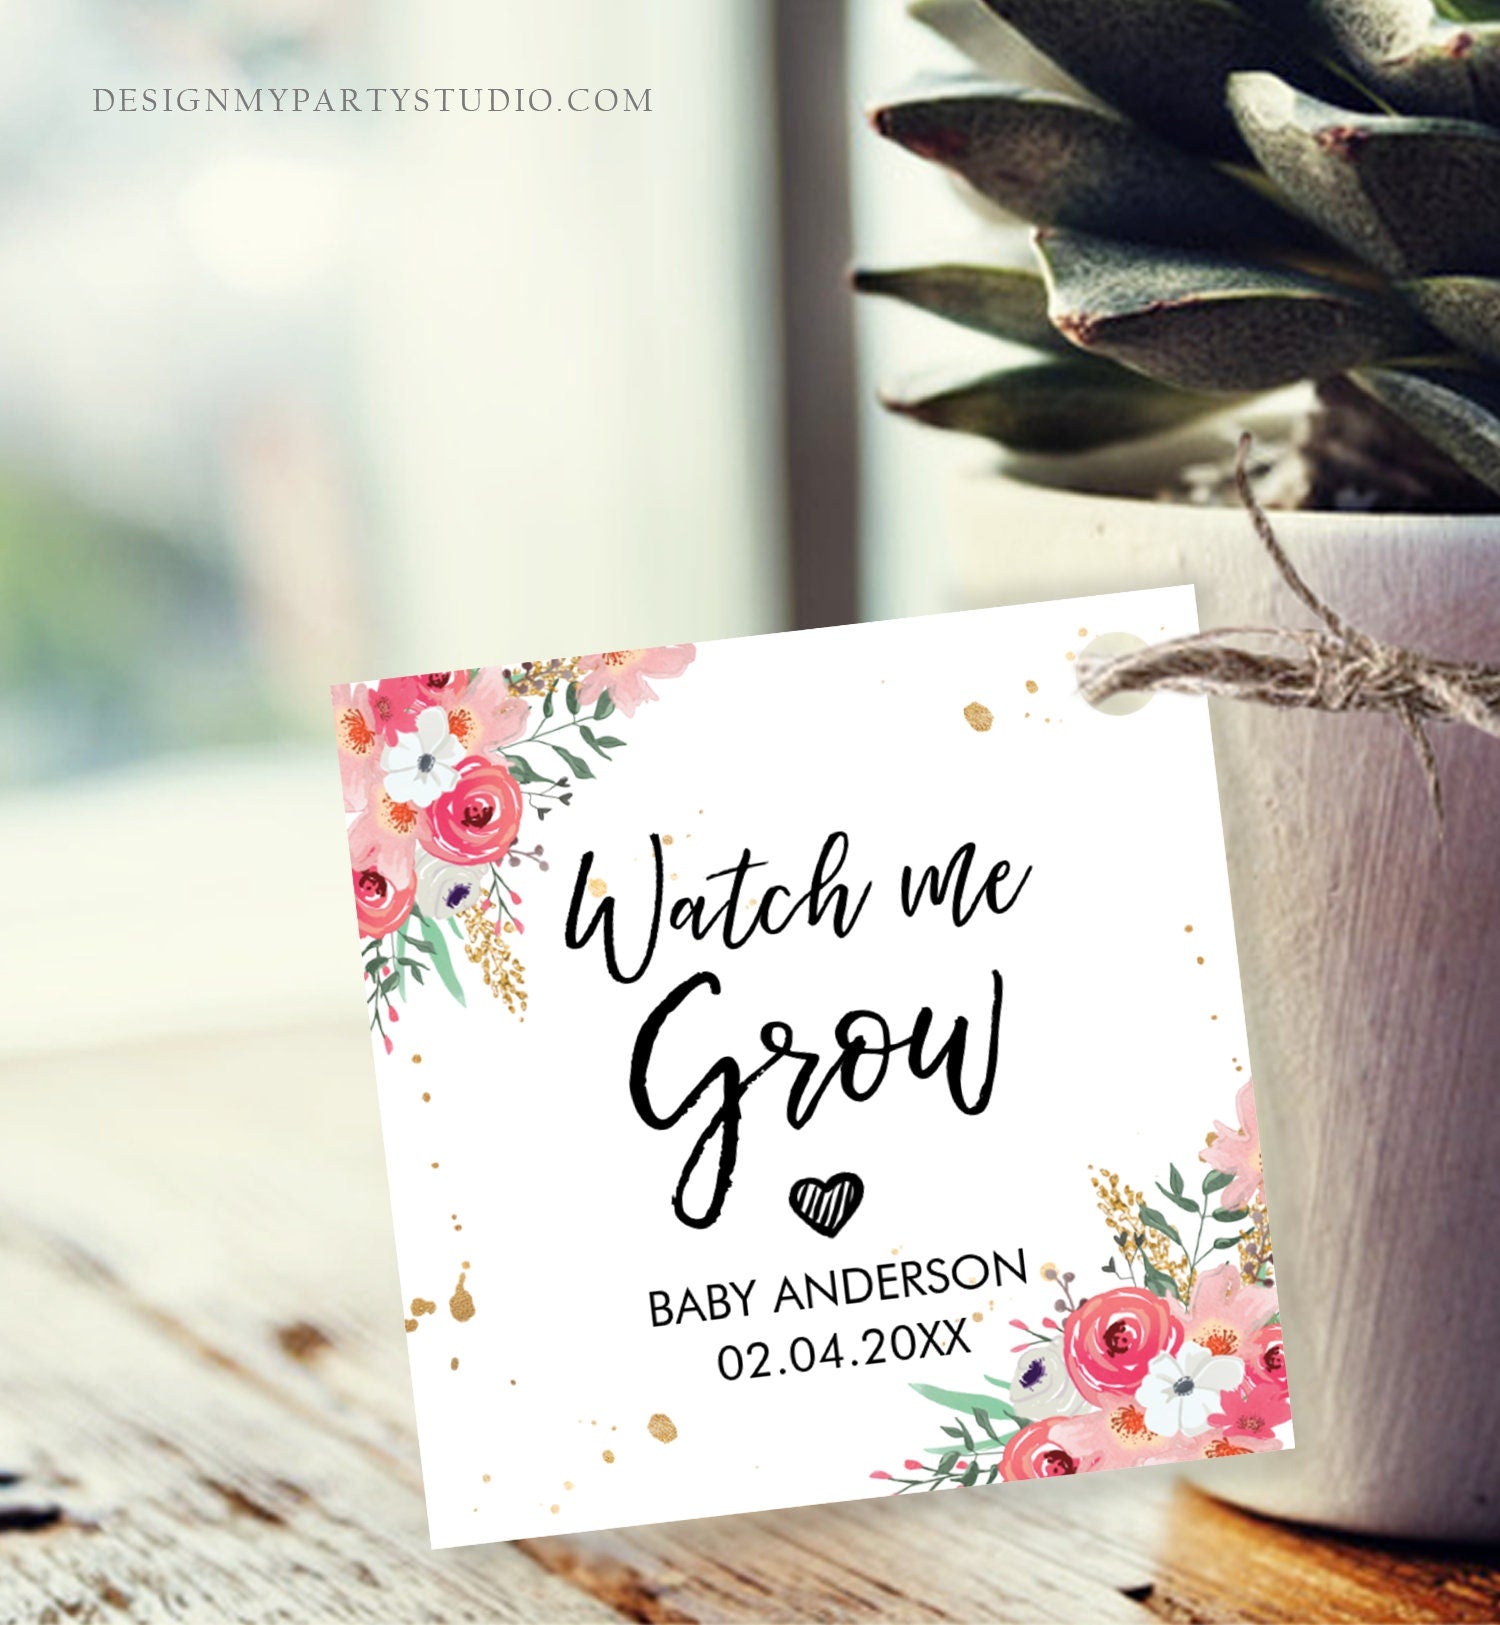 Editable Watch Me Grow Tags Baby Shower Favor Tags Plant Tags Cactus Succulent Thank You Tag Pink Floral Gold Corjl Template Printable 0030